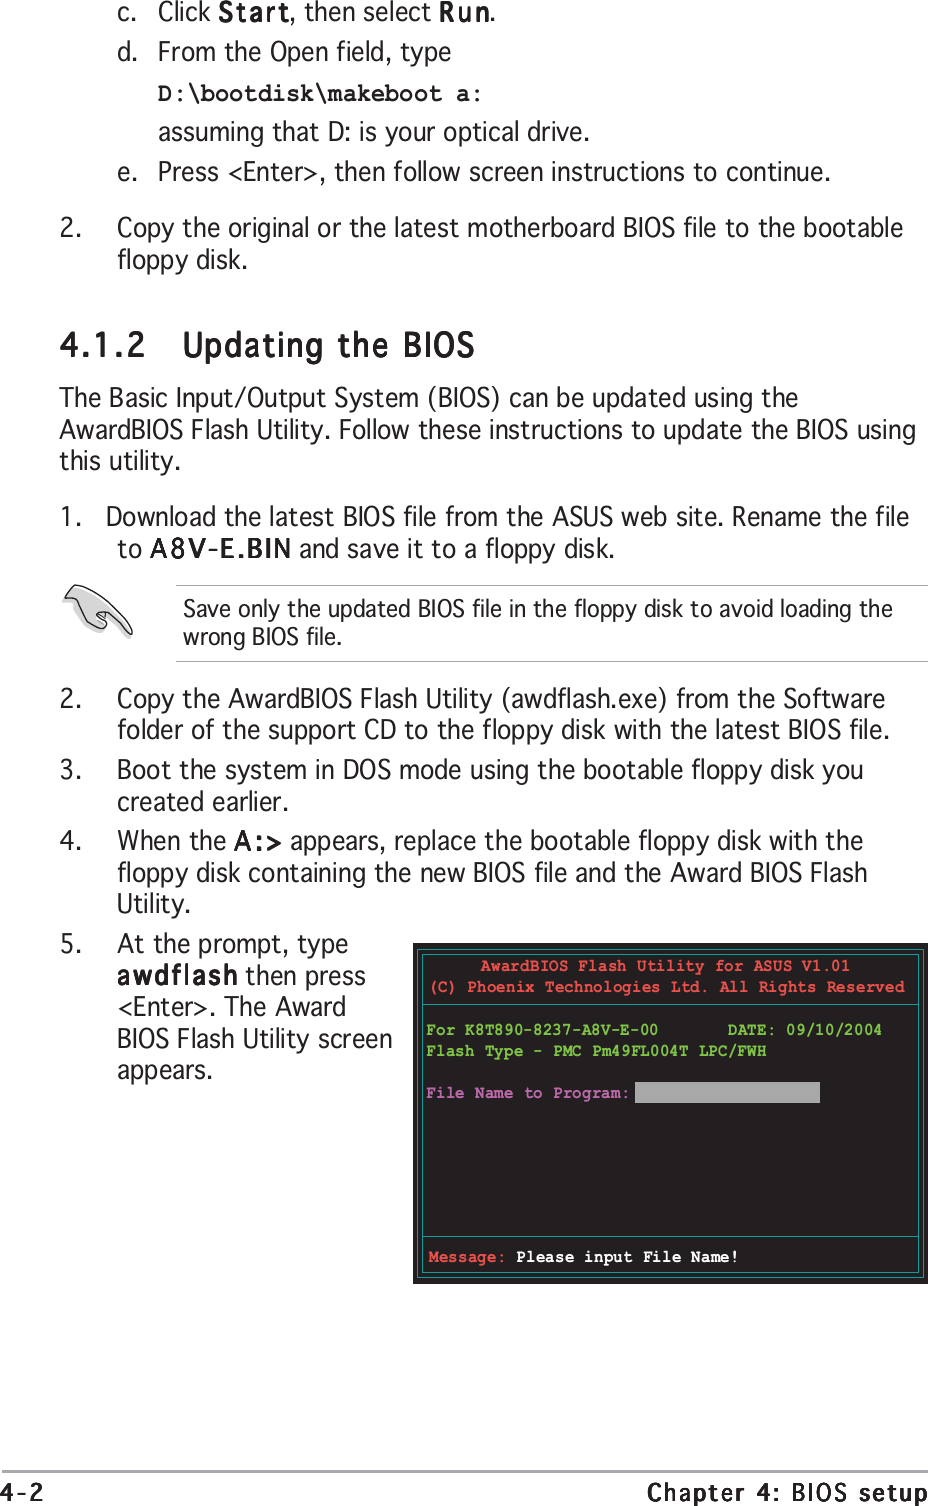 4-24-24-24-24-2 Chapter 4: BIOS setupChapter 4: BIOS setupChapter 4: BIOS setupChapter 4: BIOS setupChapter 4: BIOS setupc. Click StartStartStartStartStart, then select RunRunRunRunRun.d. From the Open field, typeD:\bootdisk\makeboot a:assuming that D: is your optical drive.e. Press &lt;Enter&gt;, then follow screen instructions to continue.2. Copy the original or the latest motherboard BIOS file to the bootablefloppy disk.4.1.24.1.24.1.24.1.24.1.2 Updating the BIOSUpdating the BIOSUpdating the BIOSUpdating the BIOSUpdating the BIOSThe Basic Input/Output System (BIOS) can be updated using theAwardBIOS Flash Utility. Follow these instructions to update the BIOS usingthis utility.1.   Download the latest BIOS file from the ASUS web site. Rename the fileto A8V-E.BINA8V-E.BINA8V-E.BINA8V-E.BINA8V-E.BIN and save it to a floppy disk.Save only the updated BIOS file in the floppy disk to avoid loading thewrong BIOS file.2. Copy the AwardBIOS Flash Utility (awdflash.exe) from the Softwarefolder of the support CD to the floppy disk with the latest BIOS file.3. Boot the system in DOS mode using the bootable floppy disk youcreated earlier.4. When the A:&gt;A:&gt;A:&gt;A:&gt;A:&gt; appears, replace the bootable floppy disk with thefloppy disk containing the new BIOS file and the Award BIOS FlashUtility.5. At the prompt, typeawdflashawdflashawdflashawdflashawdflash then press&lt;Enter&gt;. The AwardBIOS Flash Utility screenappears.AwardBIOS Flash Utility for ASUS V1.01(C) Phoenix Technologies Ltd. All Rights ReservedMessage: Please input File Name!For K8T890-8237-A8V-E-00       DATE: 09/10/2004Flash Type - PMC Pm49FL004T LPC/FWHFile Name to Program: